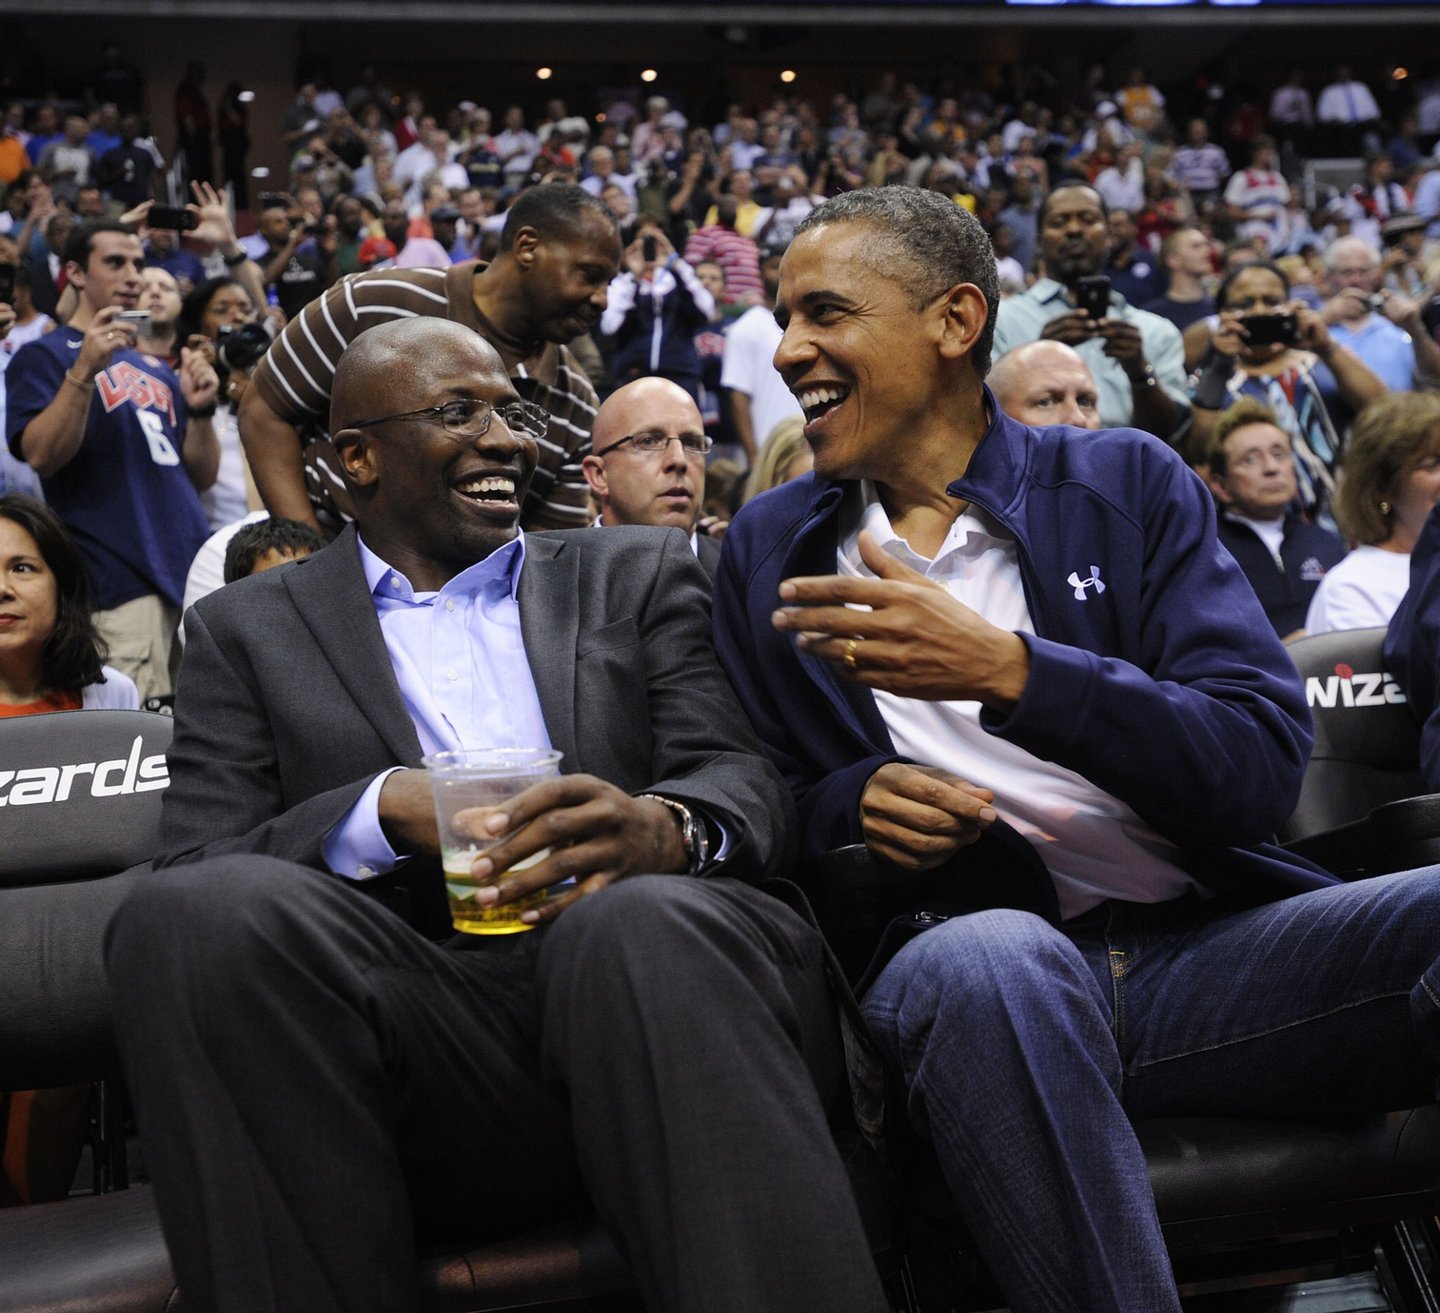 WASHINGTON, DC - JULY 16: U.S. President Barack Obama shares a laugh with former White House aide Reggie Love as they watch the US Senior Men's National Team and Brazil play during a pre-Olympic exhibition basketball game at the Verizon Center on July 16, 2012 in Washington, DC. (Photo by Leslie E. Kossoff-Pool/Getty Images)